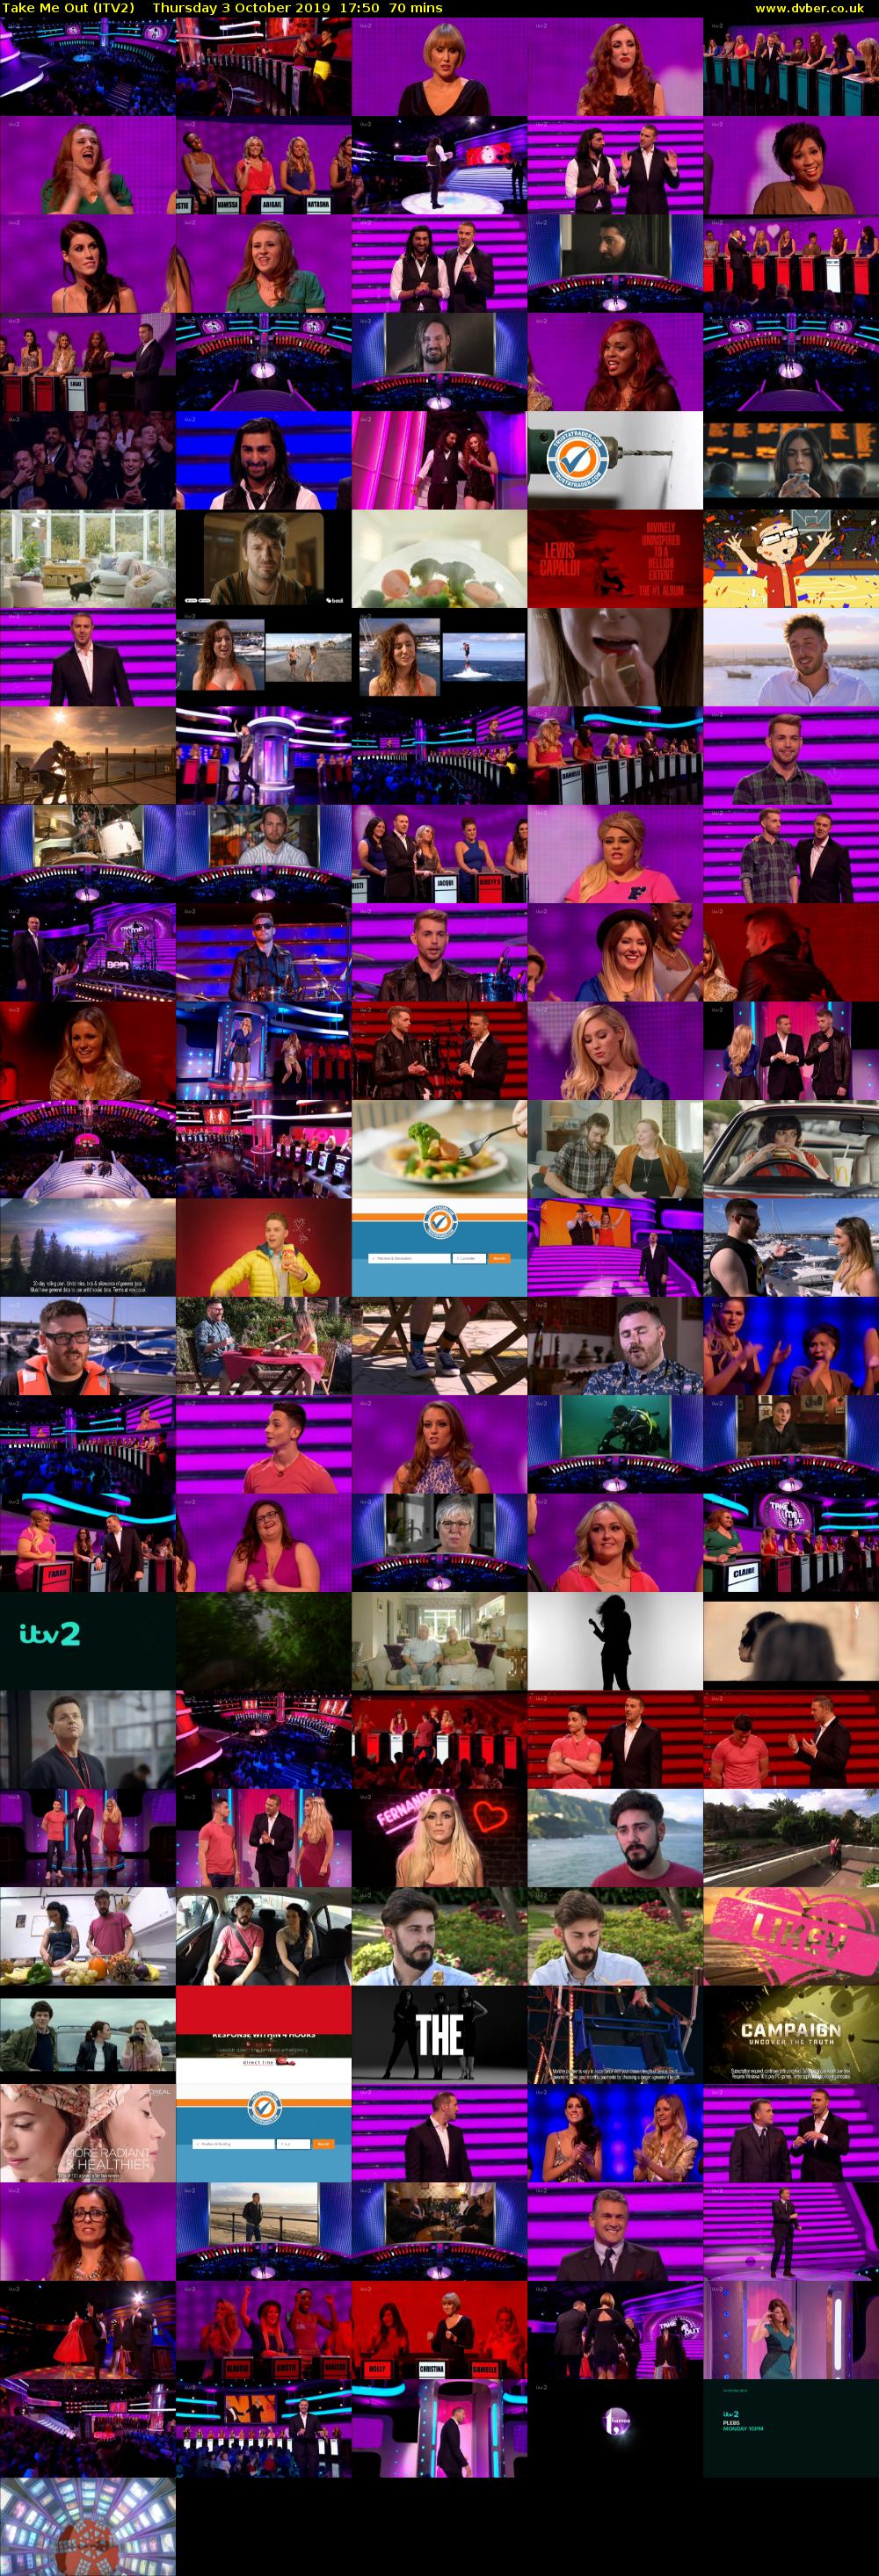 Take Me Out (ITV2) Thursday 3 October 2019 17:50 - 19:00